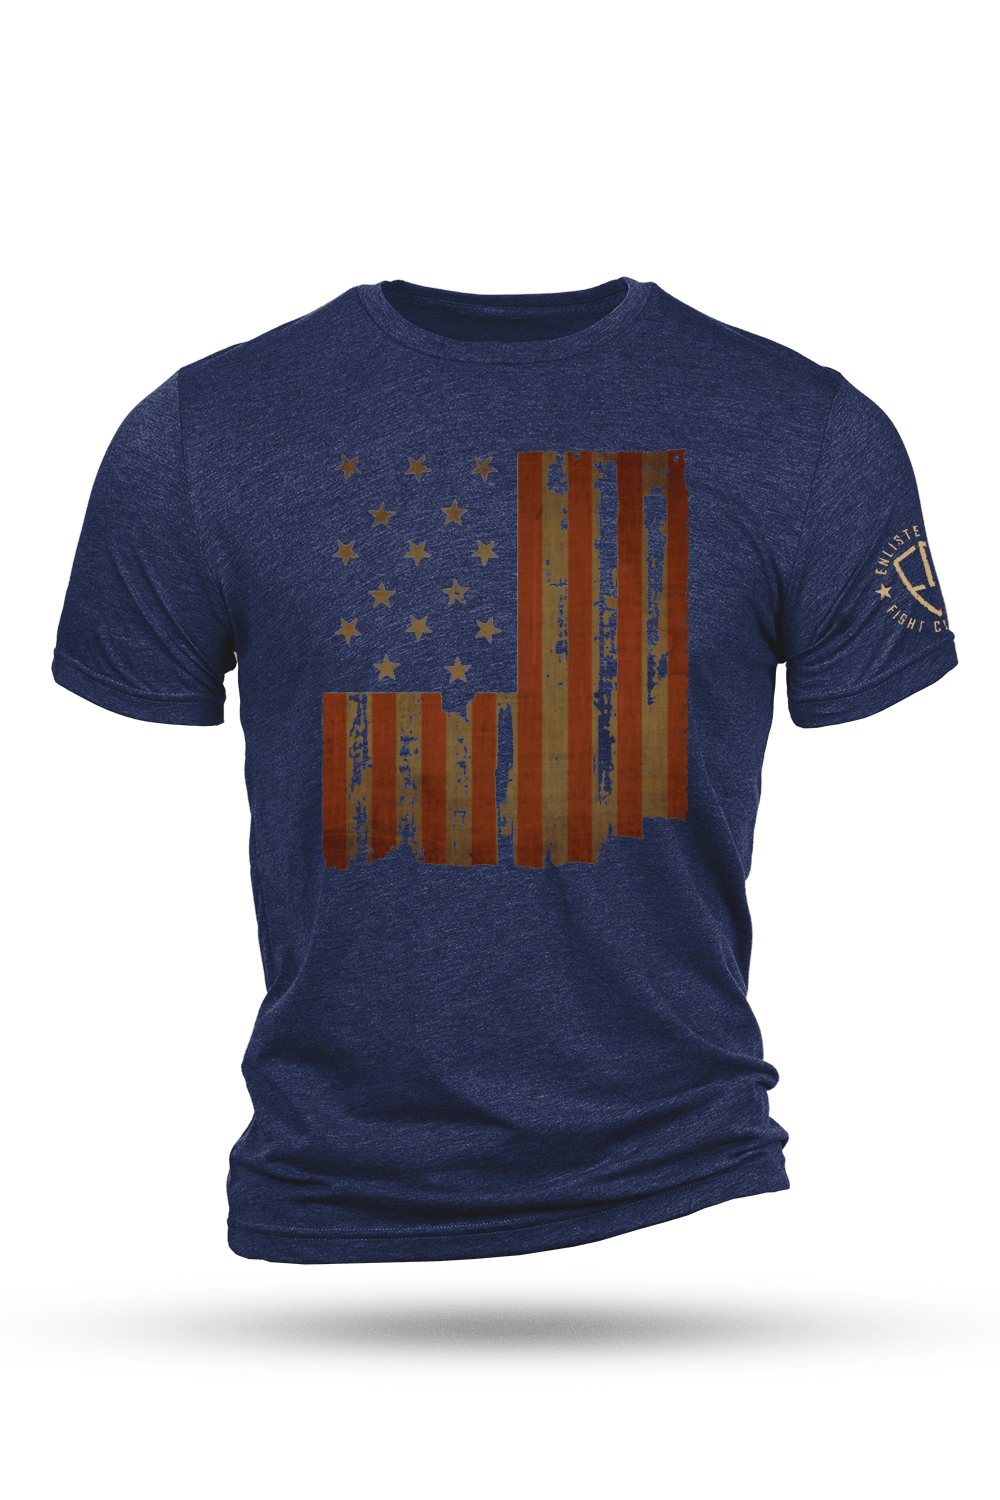 Enlisted 9 - Tri-Blend T-Shirt - Oh Say Can You See